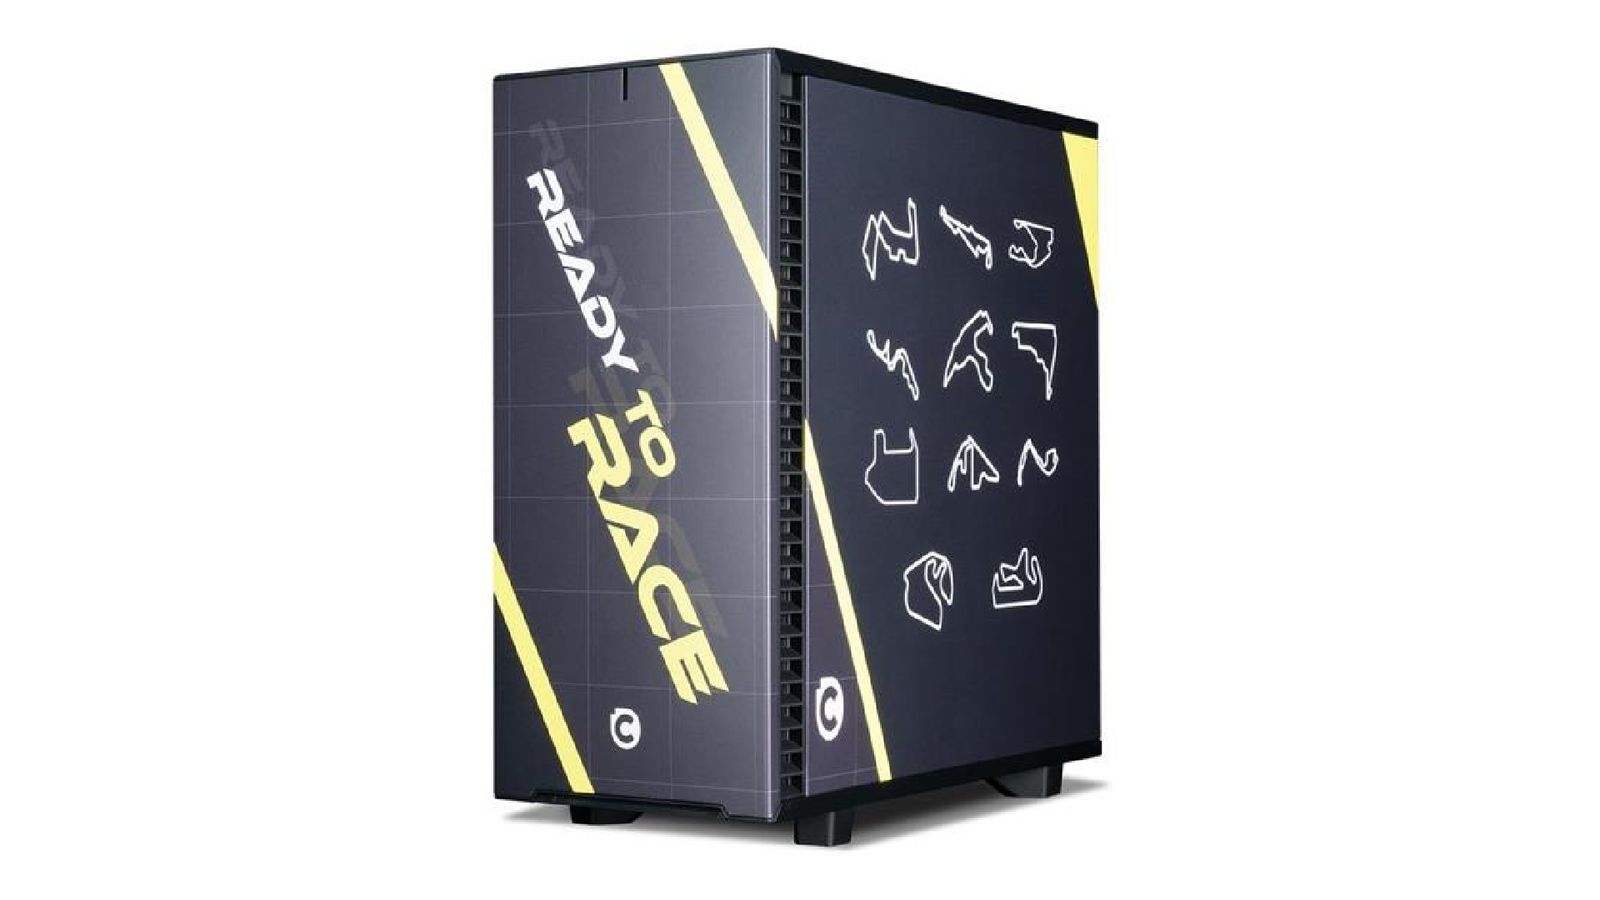 Image of a black PC complete with outlines of F1 circuits in white, diagonal yellow stripes, and "READY TO RACE" printed on the front.